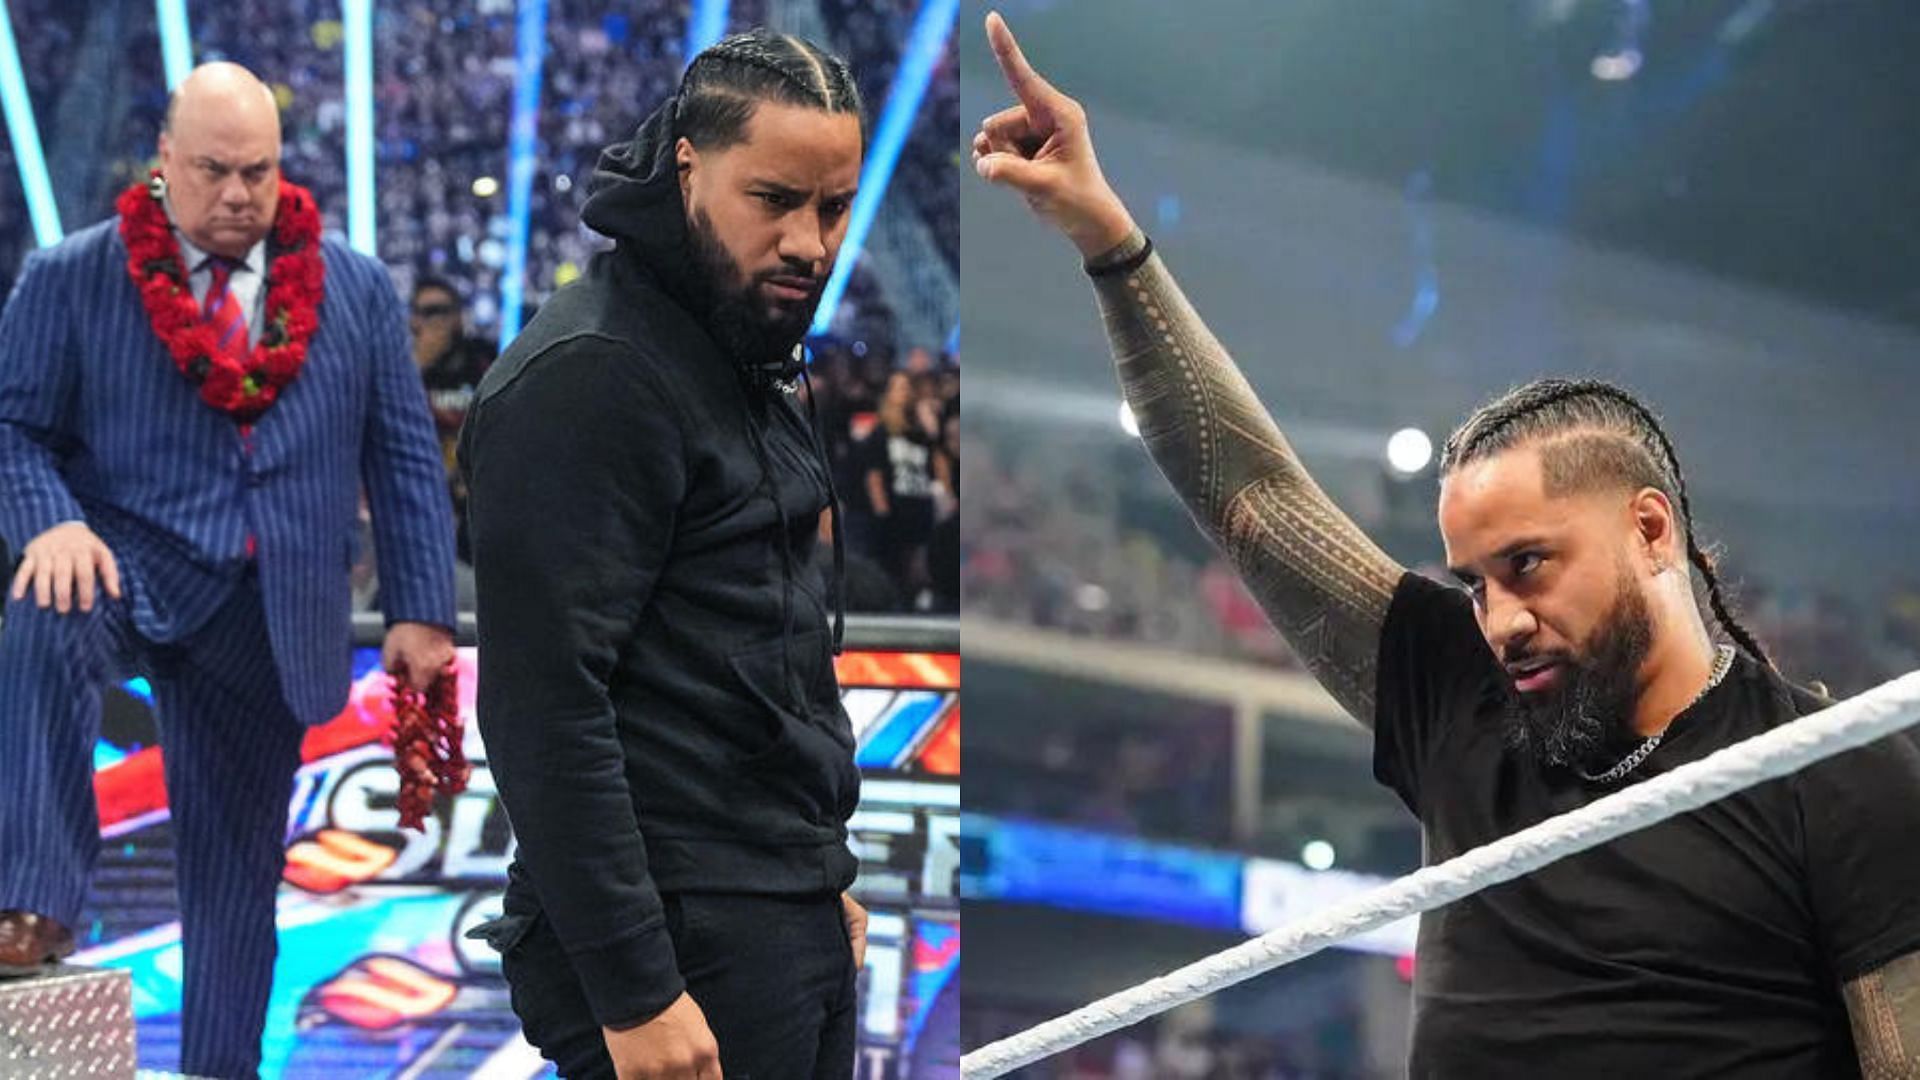 Jimmy Uso is set to face a former WWE Champion on SmackDown